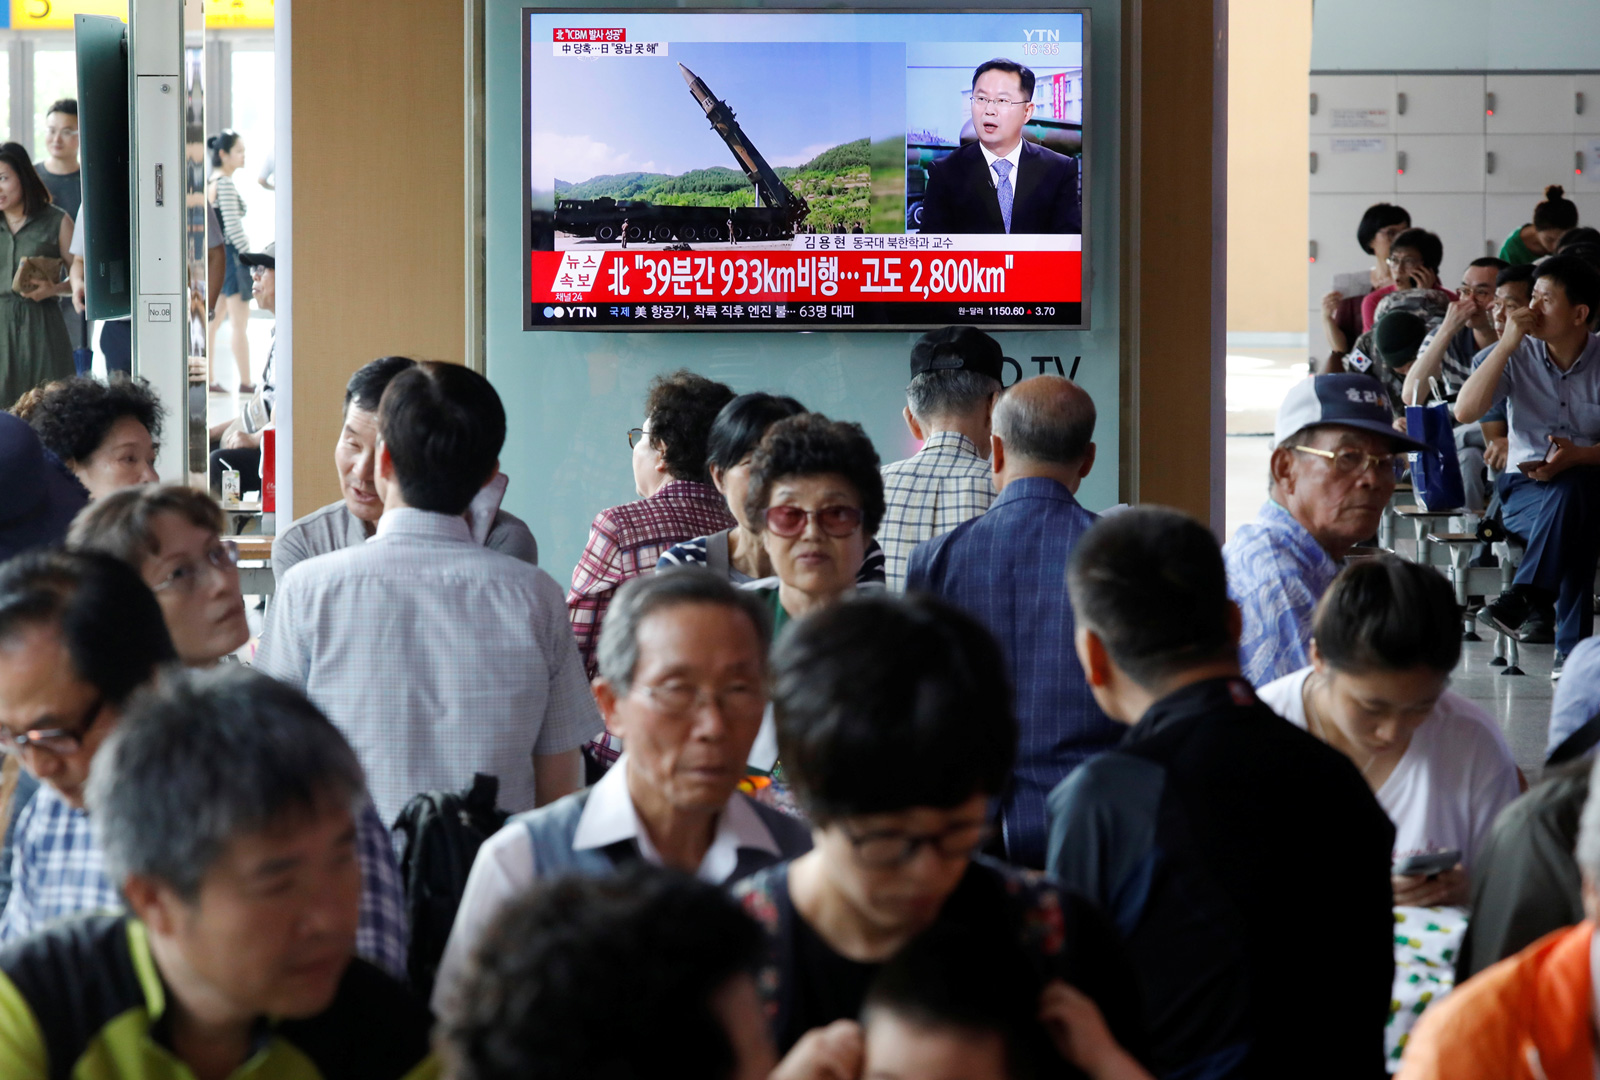 News of North Korea's intercontinental ballistic missile on a television screen at a railway station in Seoul, July 4, 2017